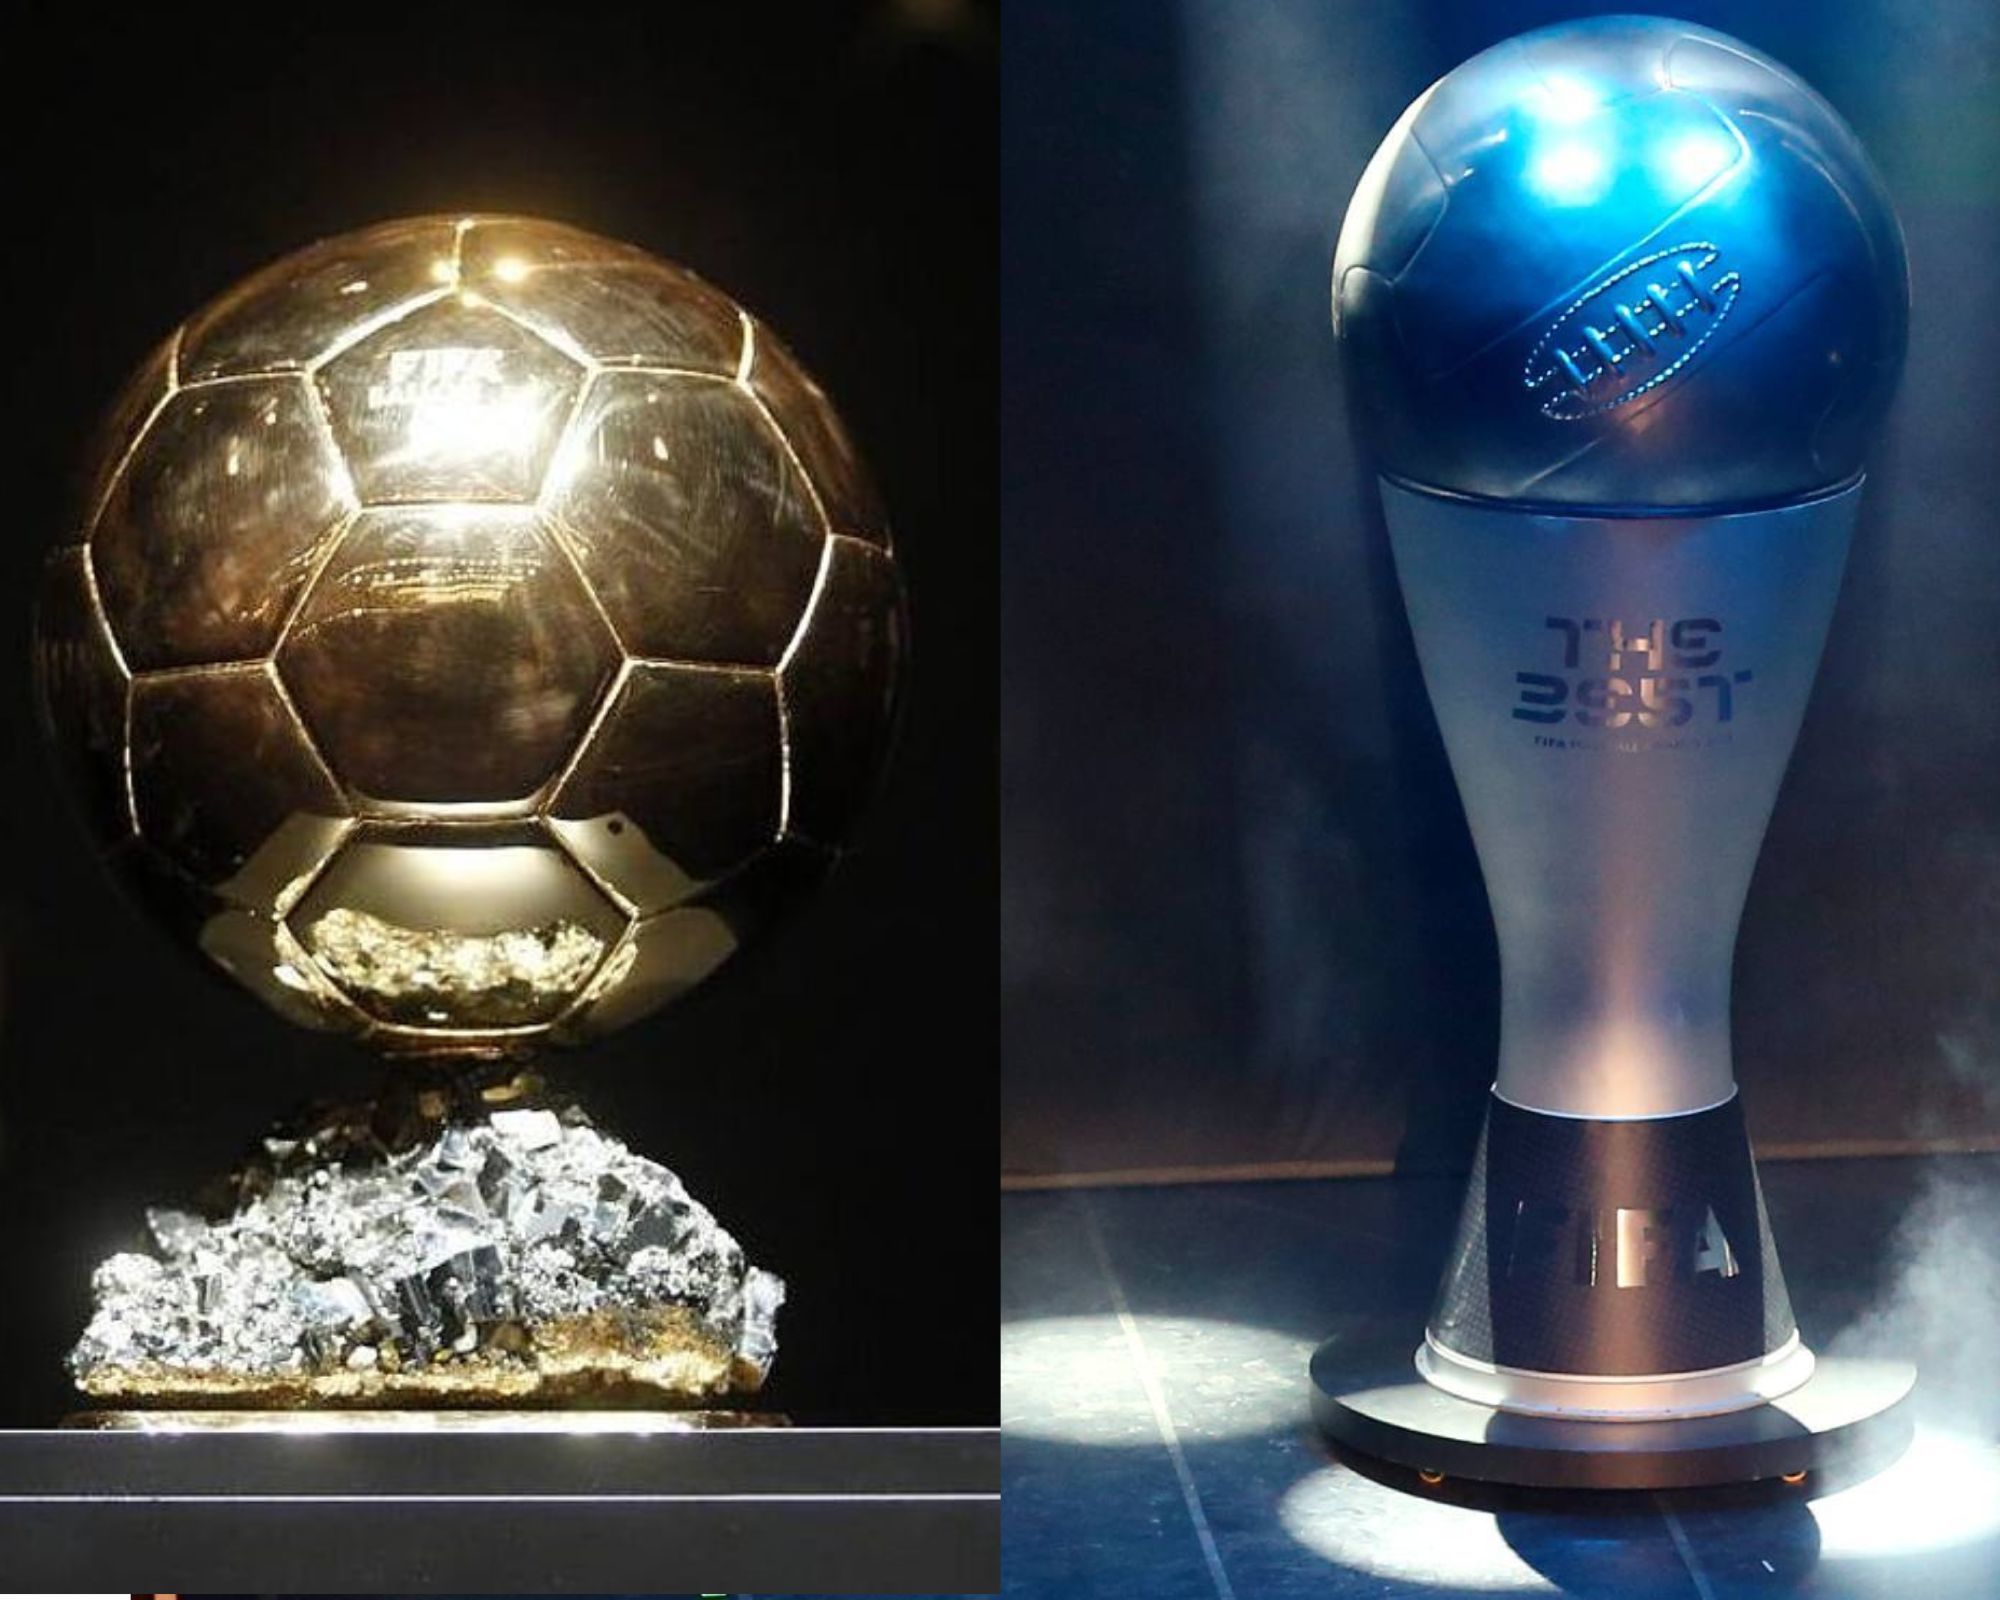 What are the differences between the Ballon d'Or and The Best?